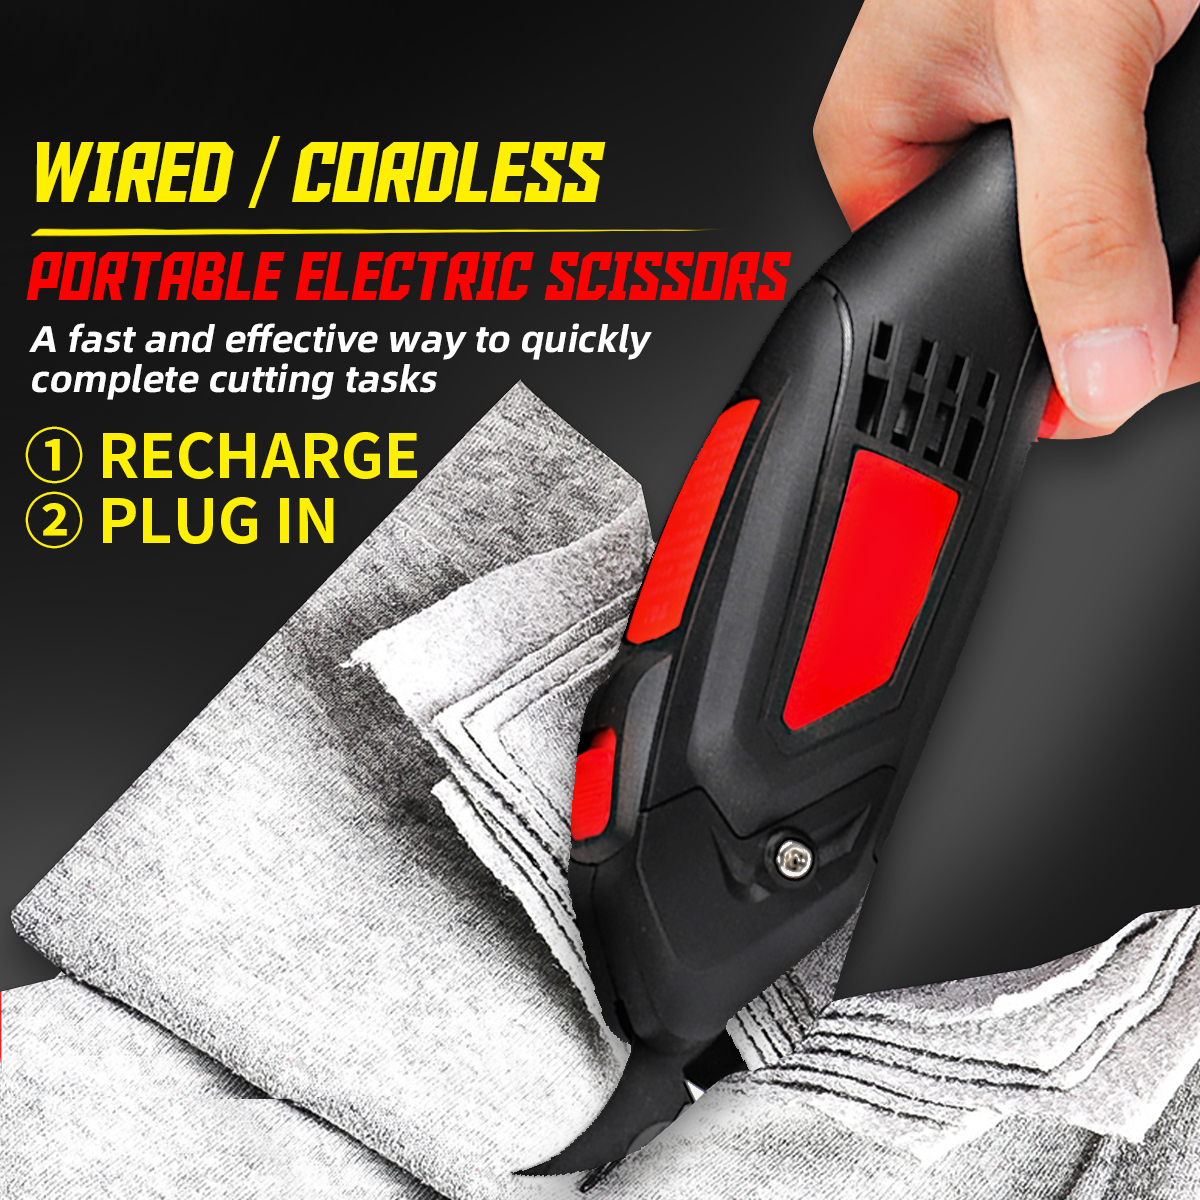 WiredCordless-Potable-Electric-Scissors-Leather-Fabric-Crafts-Cutting-Blade-Trimmer-1716218-2